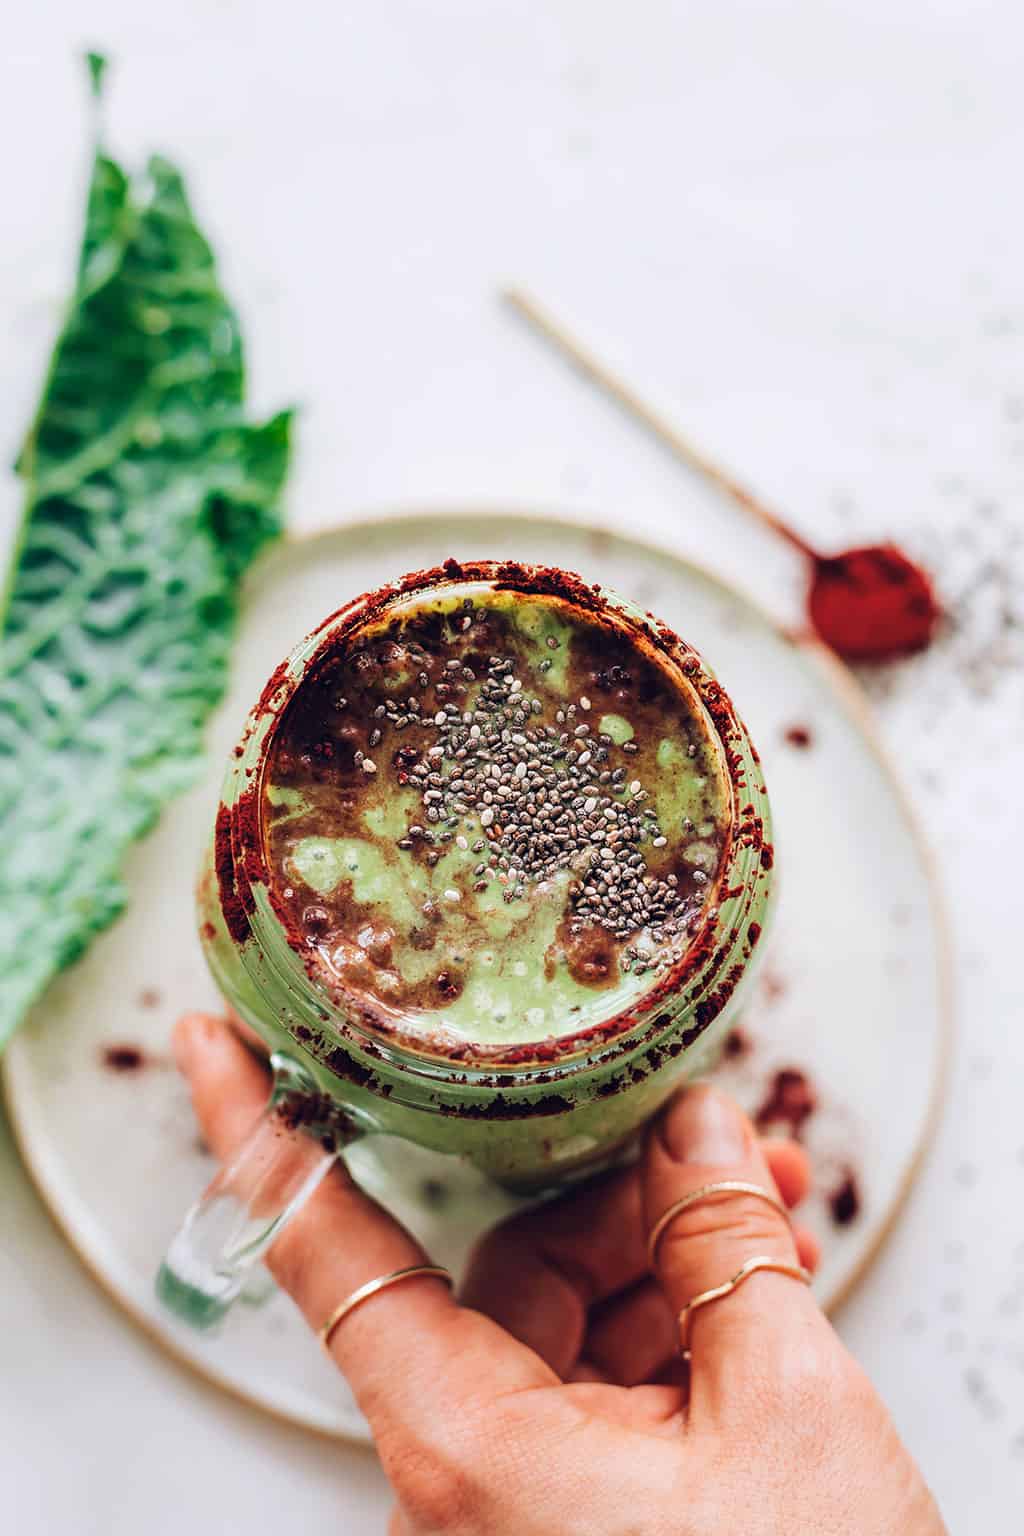 Chocolate Smoothie Recipe with chia and kale